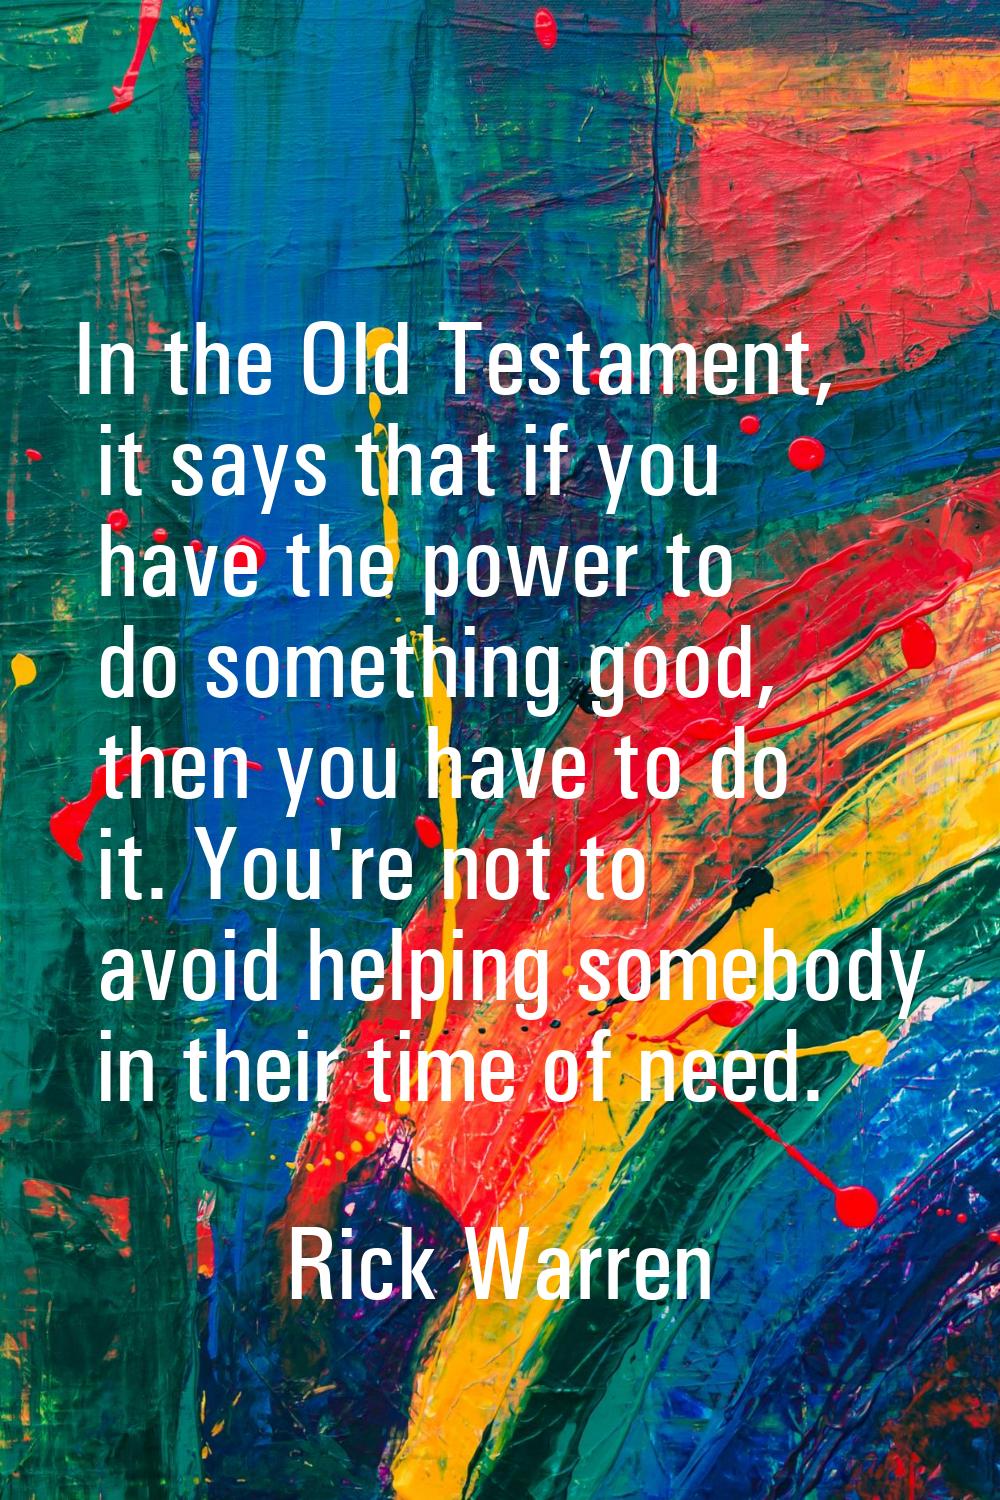 In the Old Testament, it says that if you have the power to do something good, then you have to do 